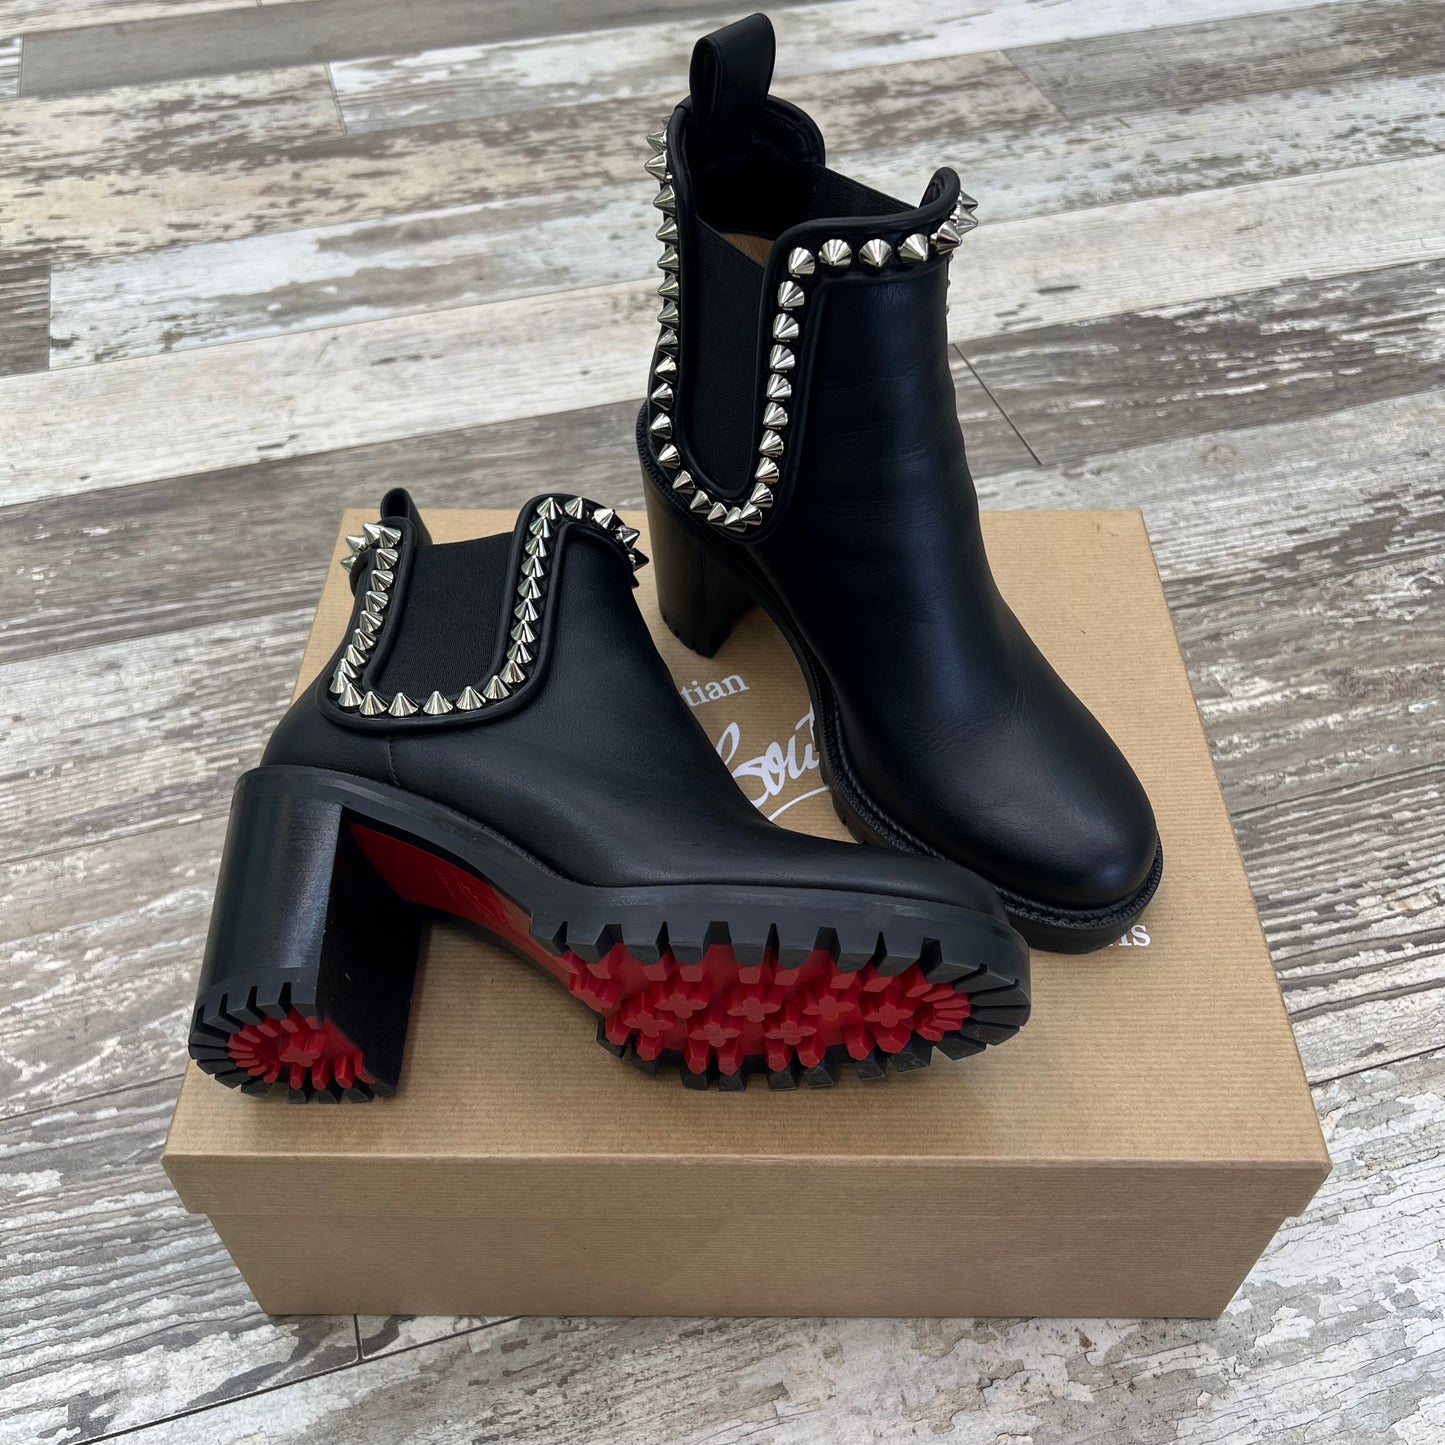 Christian Louboutin Capahutta 70mm Spiked Leather Ankle Booties, Size 35